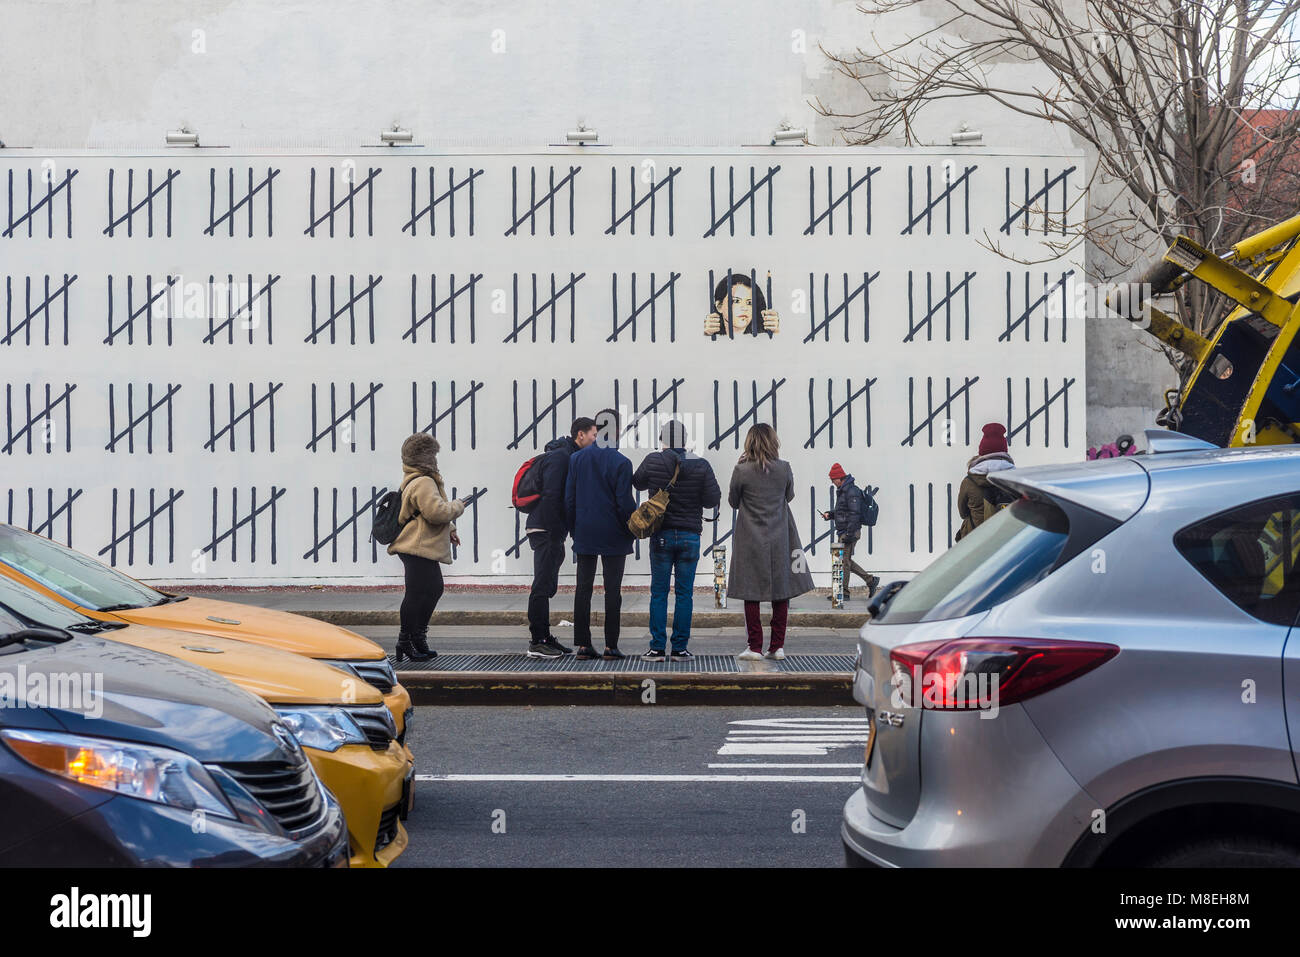 New York, NY, USA. 16th March, 2018. - Photographers and art lovers flock to Houston Street to view one of two new pieces by Street Artist, Banksy. Banksy unveiled the work Thursday which highlights the case of a Turkish artist,  Zehra Doğan was reportedly imprisoned in 2017 for her painting of a damaged Turkish city.  Credit: Stacy Walsh Rosenstock/Alamy Live News Stock Photo